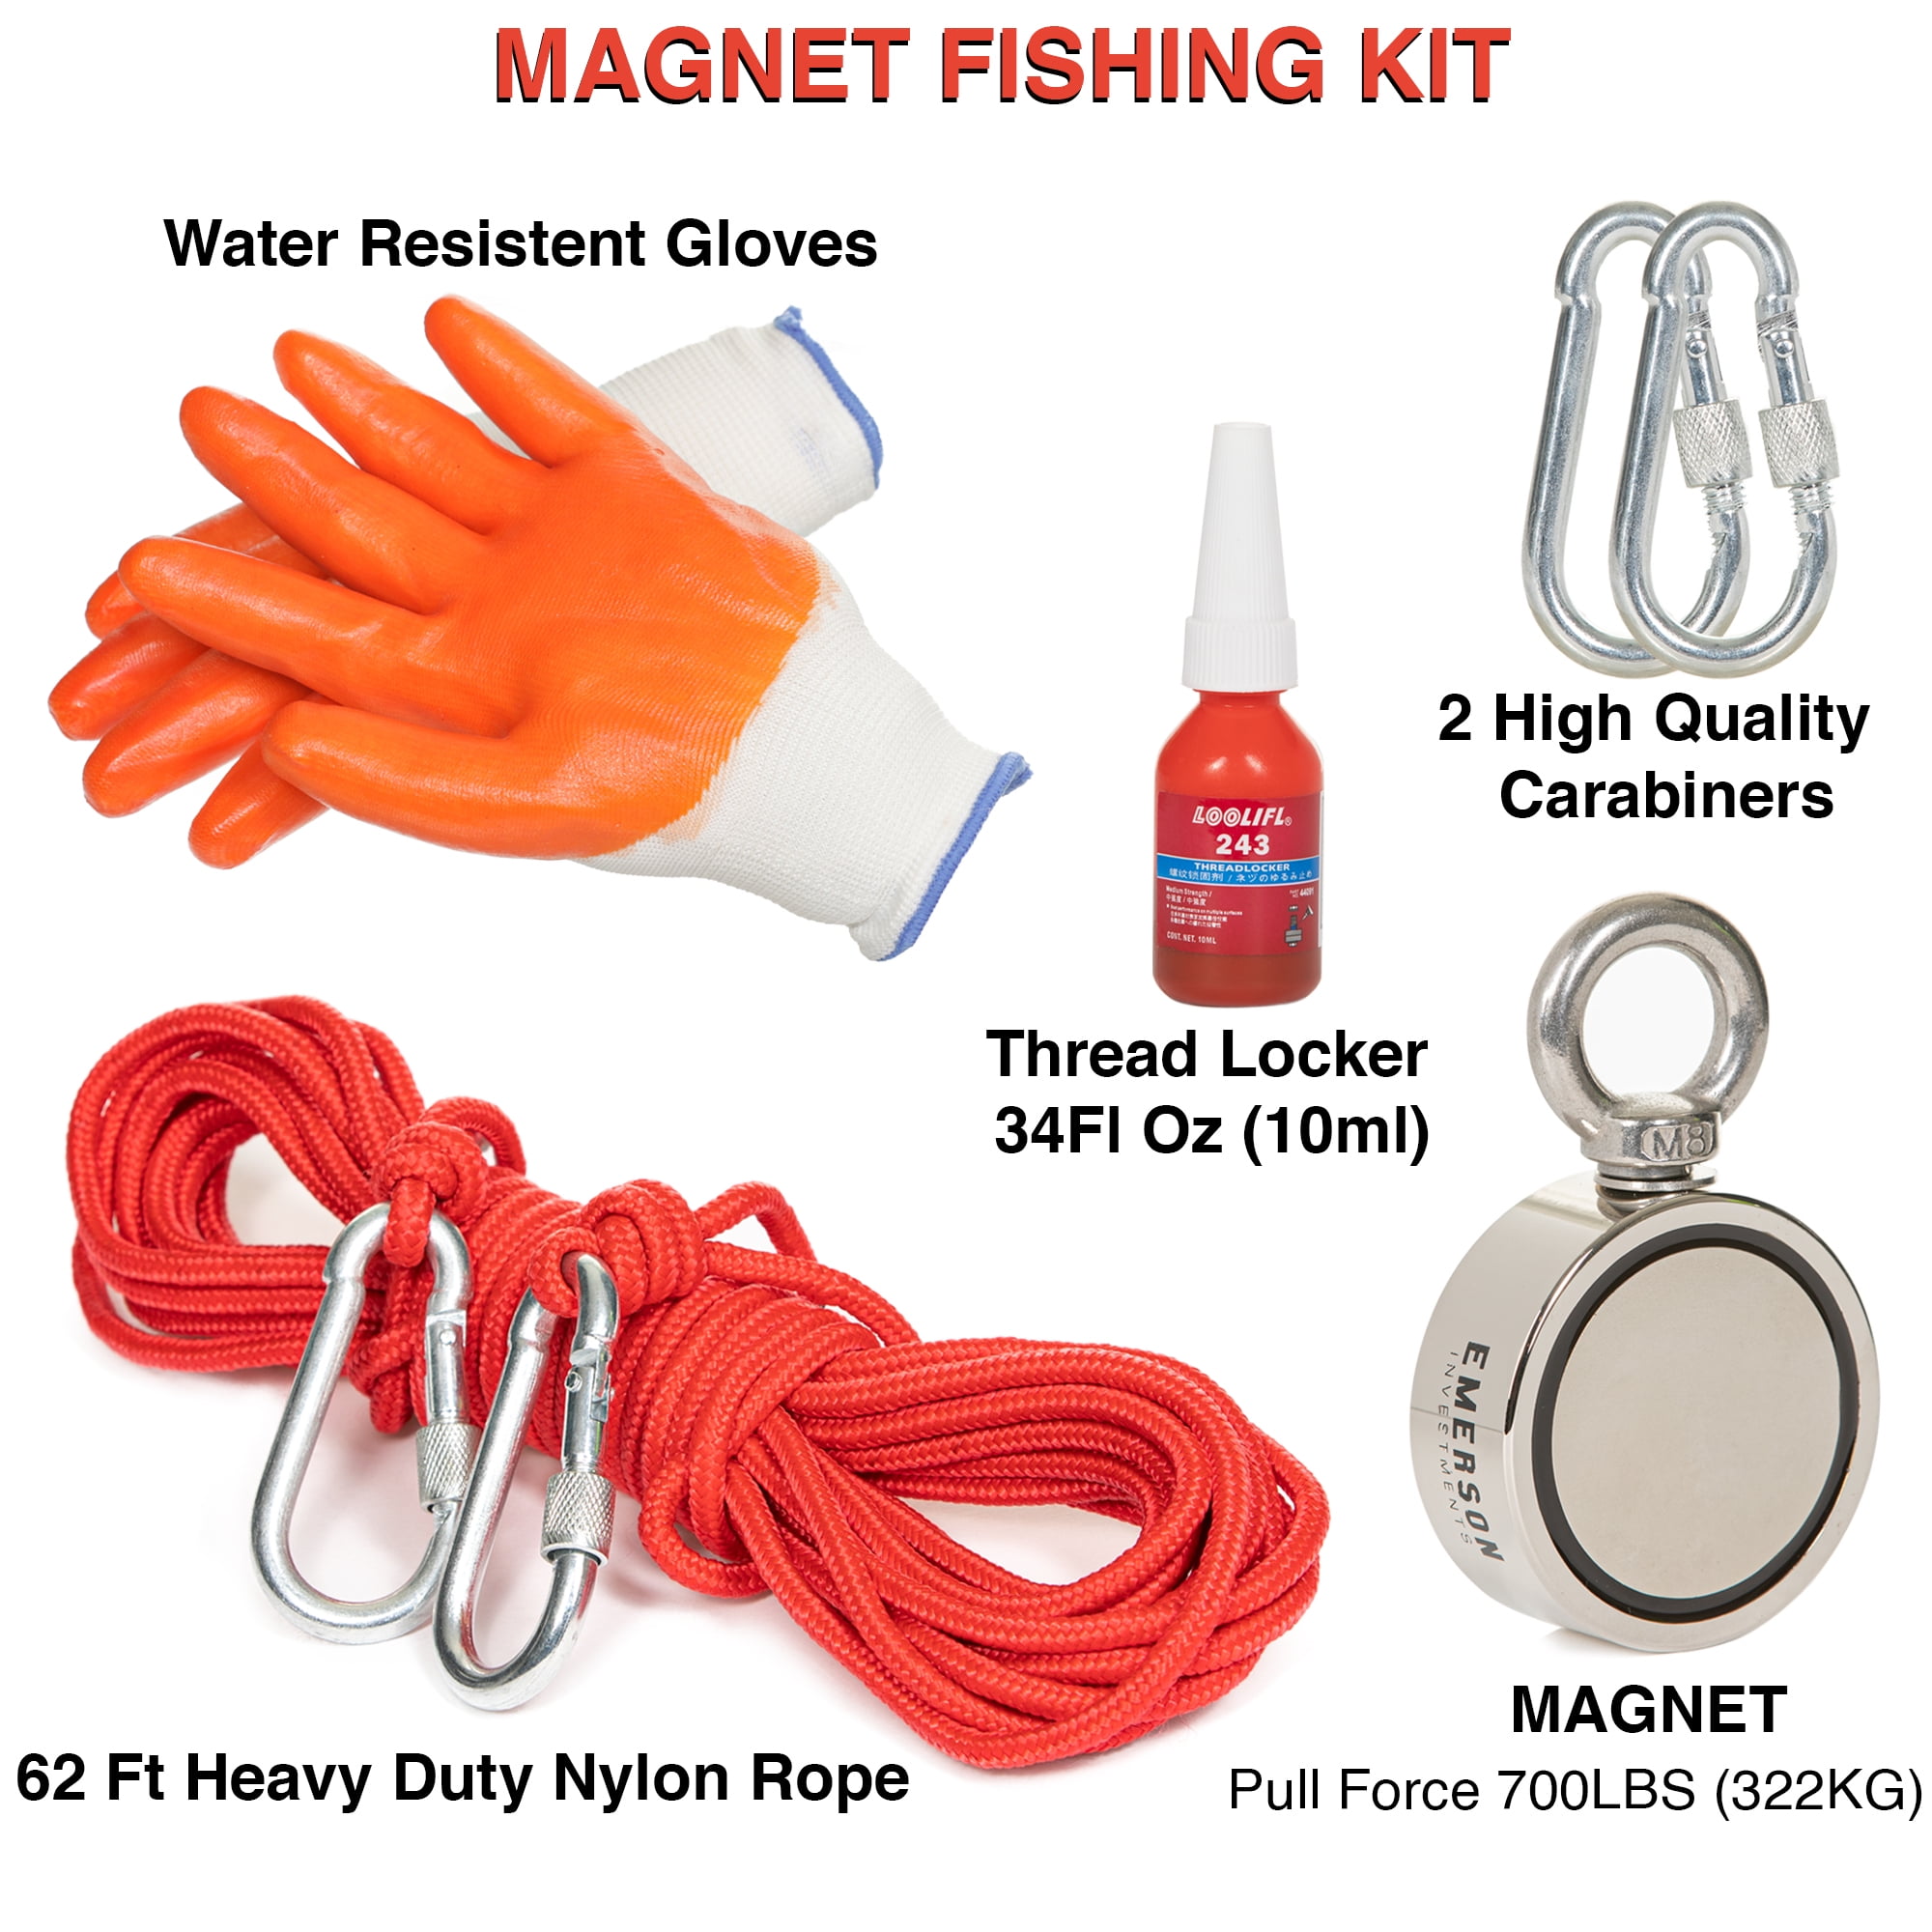 Carabiner New 850LBS Fishing Magnet Kit Pulling Force Strong Neodymium & Rope 